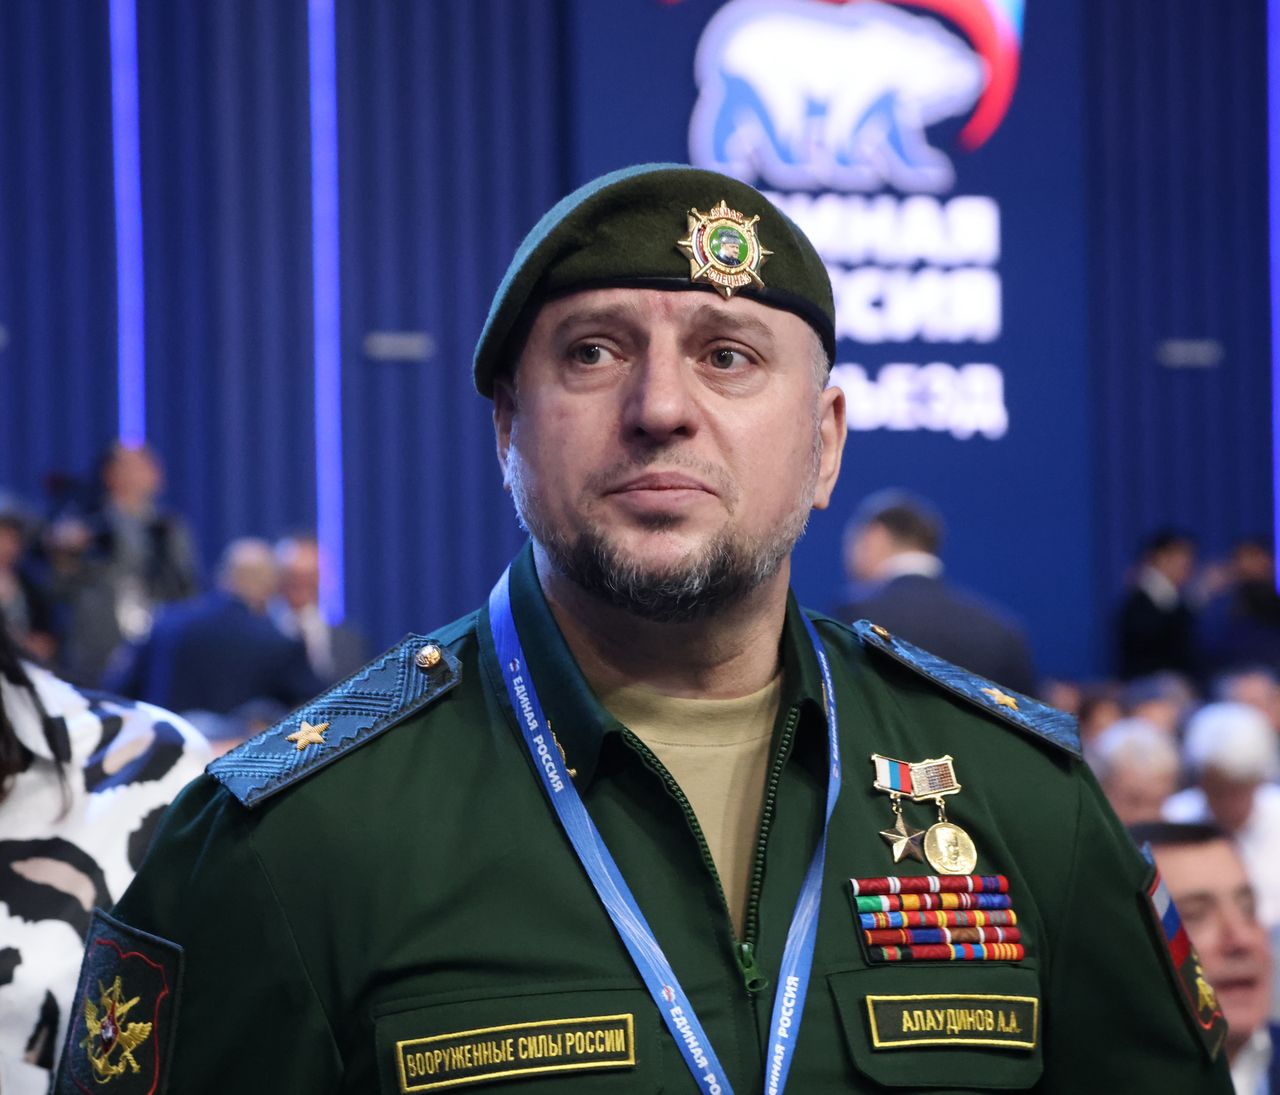 Apti Alaudinow, a close associate of Ramzan Kadyrov, commander of the Chechen battalion "Akhmat" subordinate to the National Guard Forces of Russia